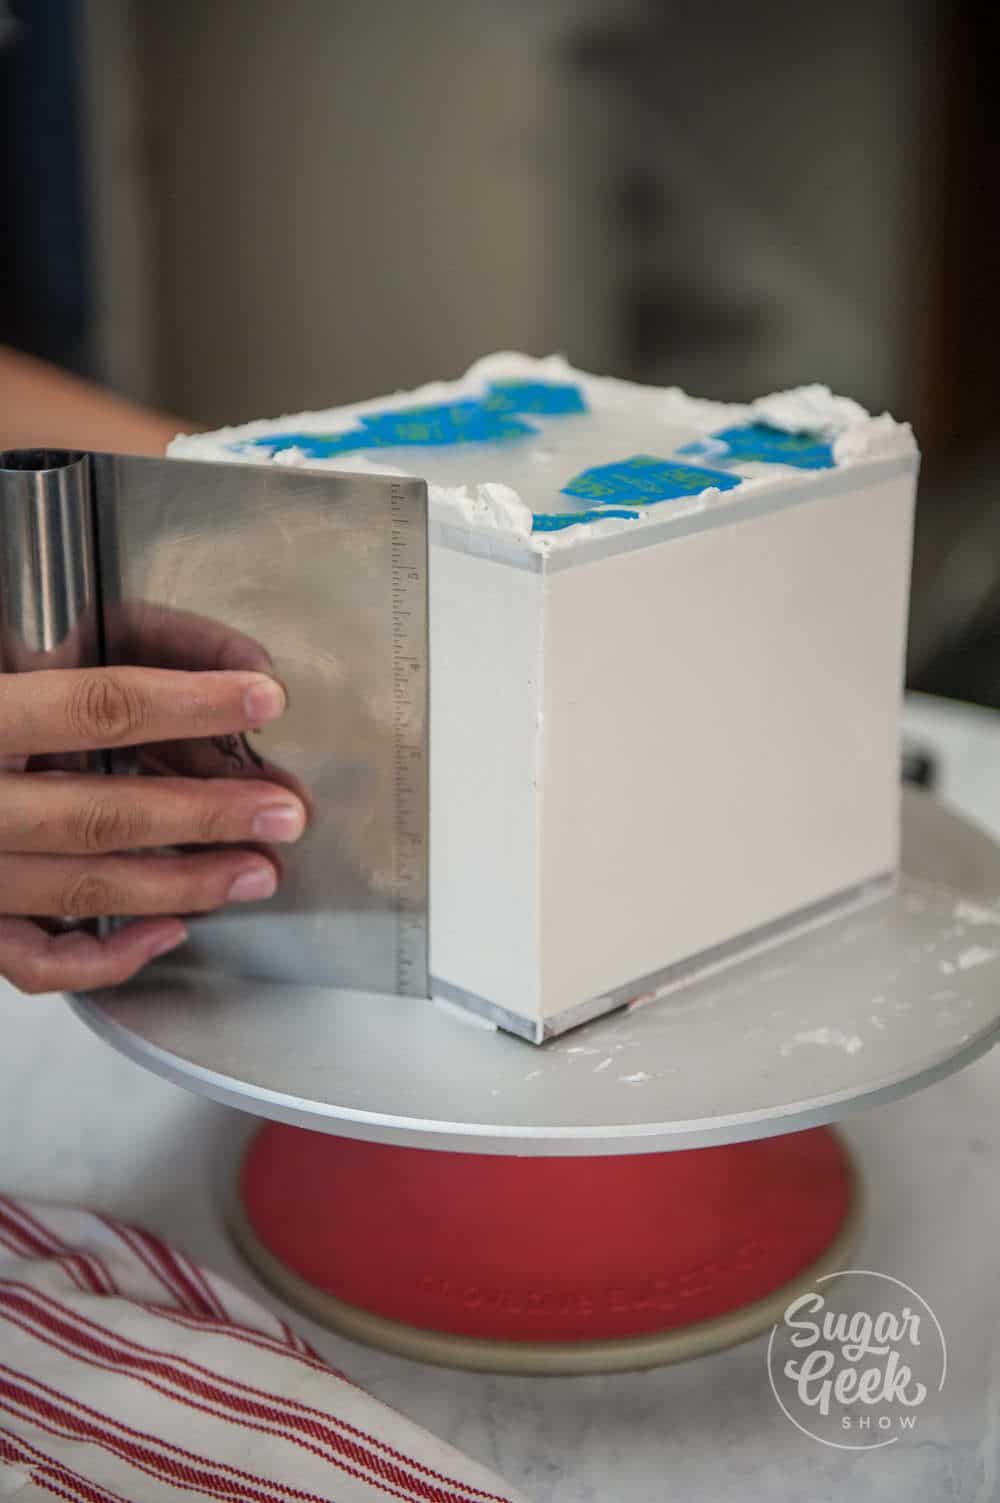 how to get sharp edges on cakes with acrylics